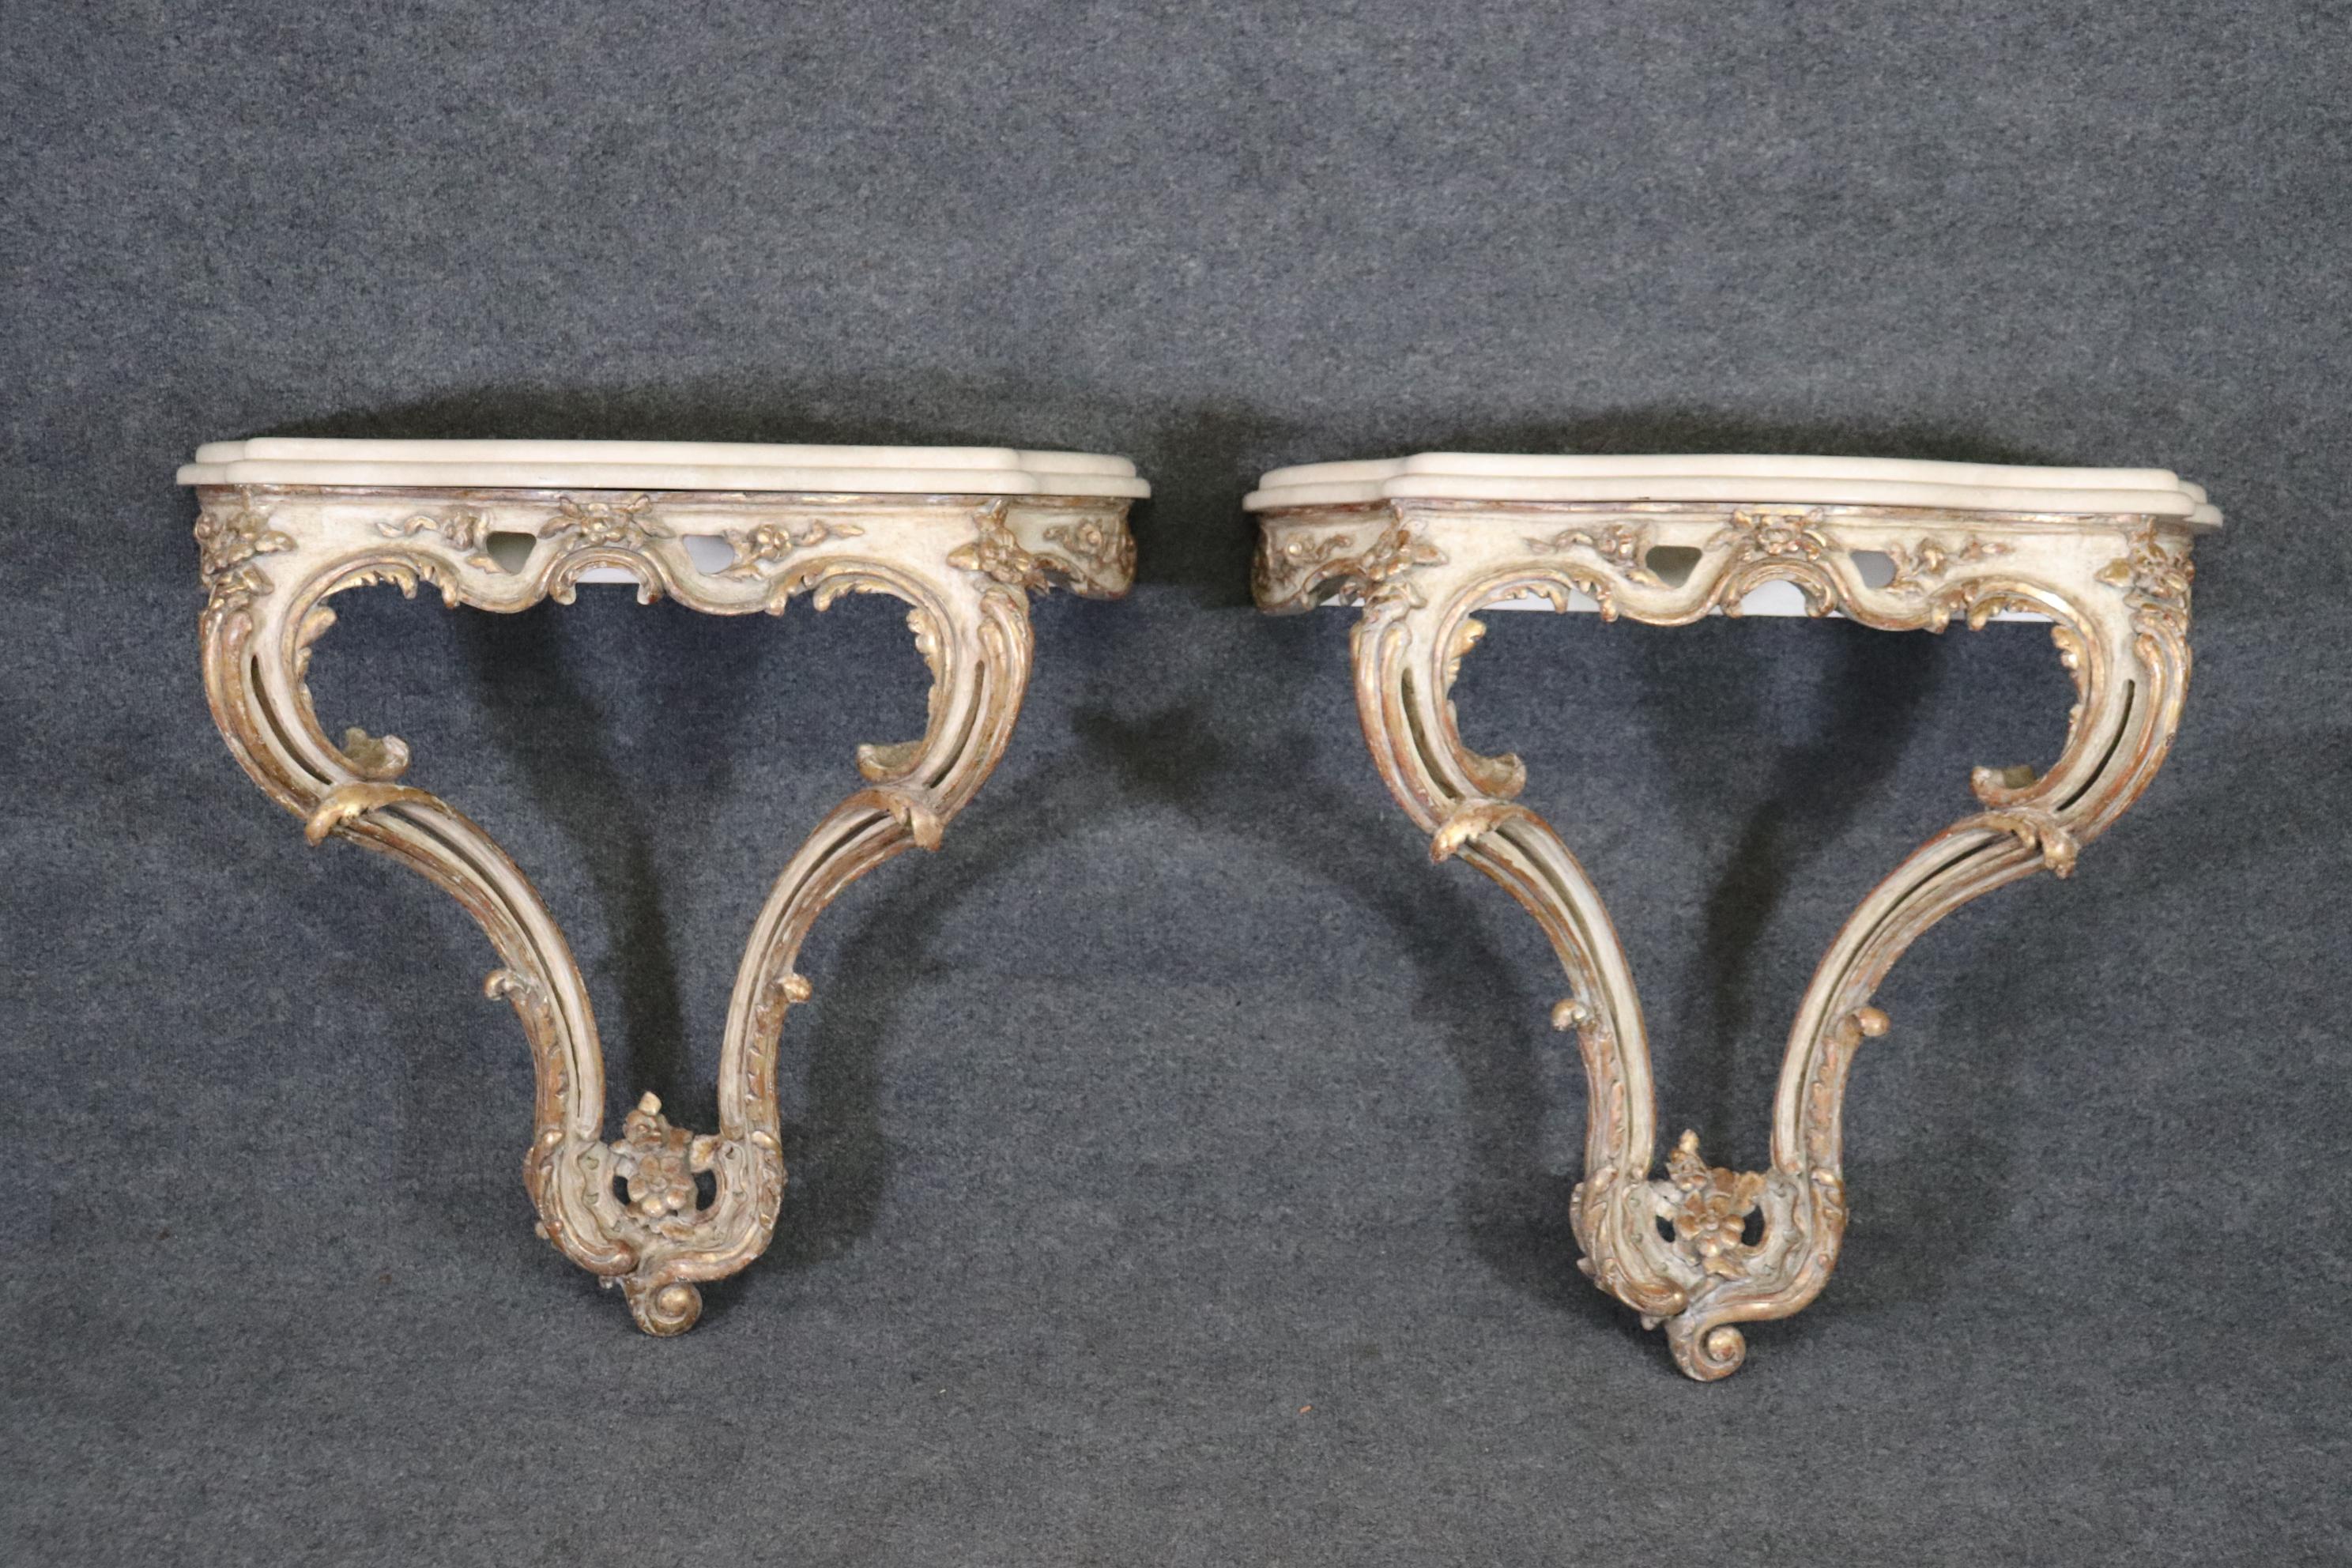 This is a gorgeous pair of wall-mounted Louis XV style painted and gilded consoles. They are painted in an antique white color, a cereamy color and gilded with gold. The tops are some form stone, perhaps marble or travertine. The tables measure 35